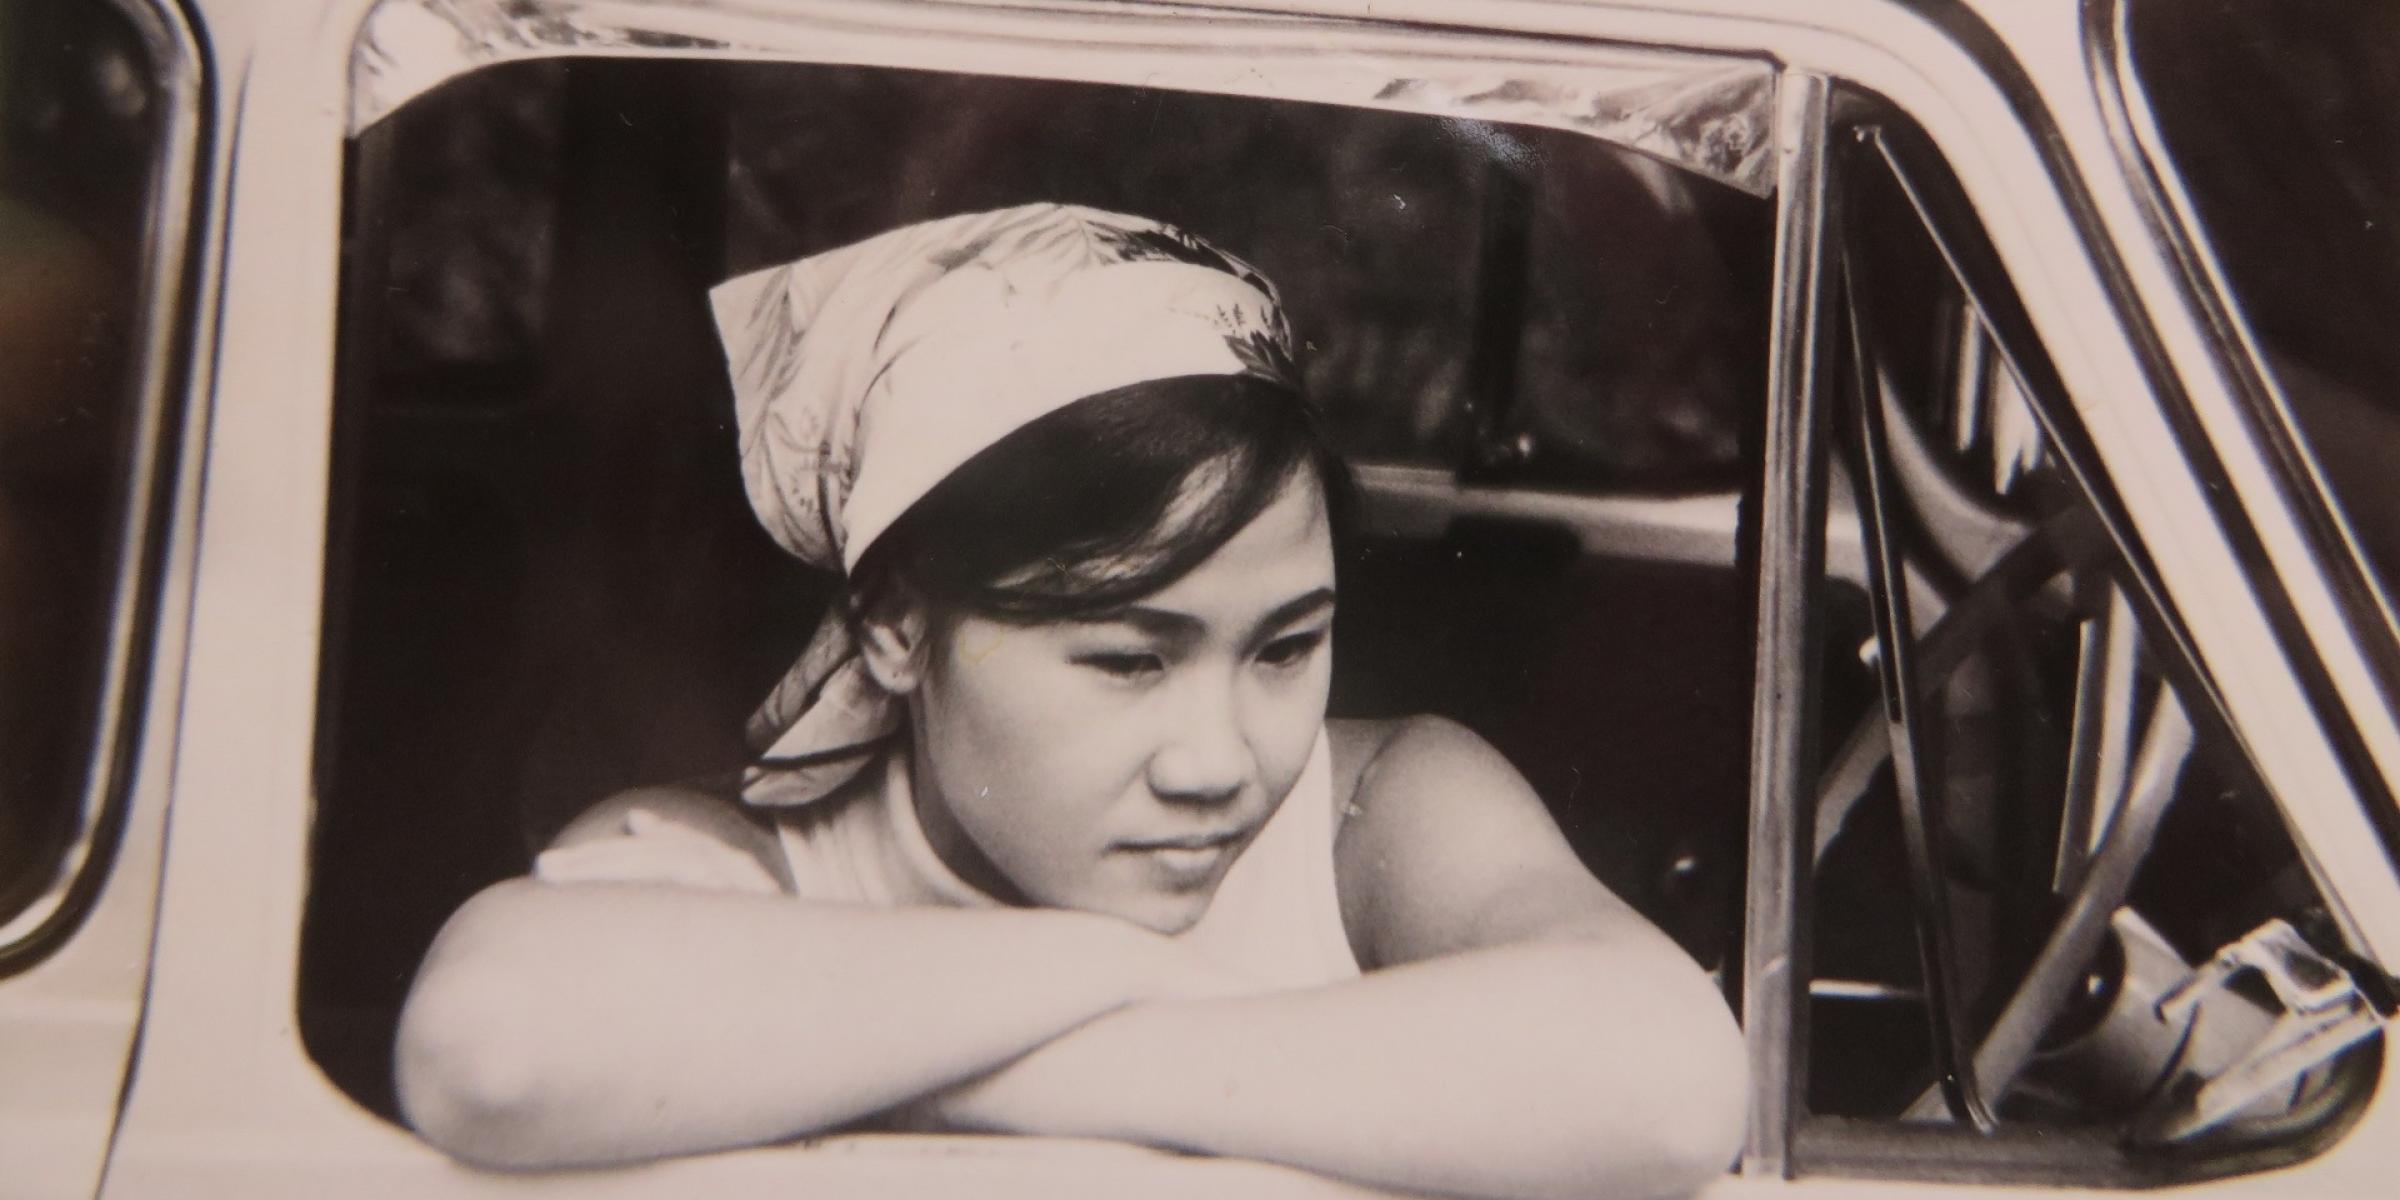 A monochrome photo of a woman leaning out of a car window